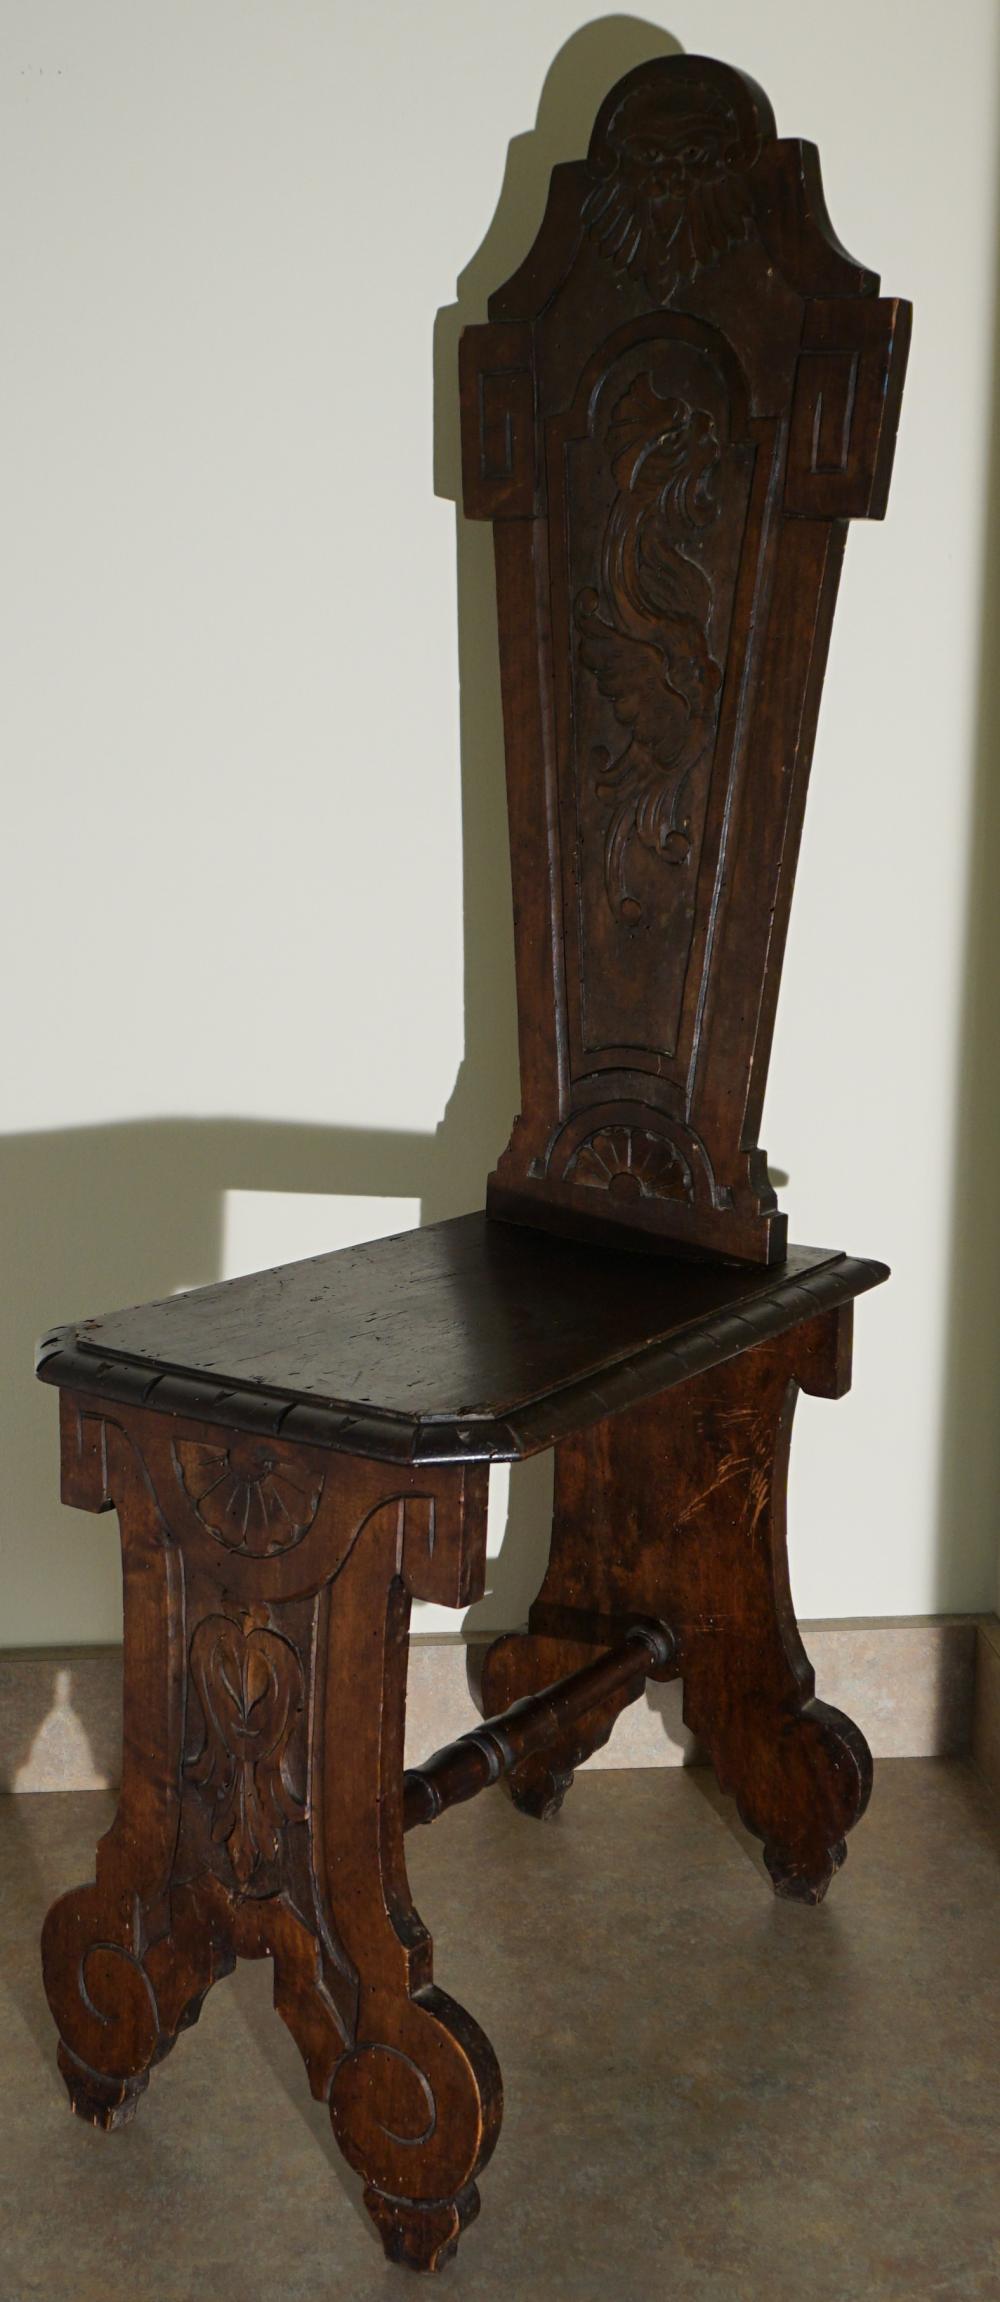 SCANDANAVIAN CARVED WOOD CHAIR  32e876